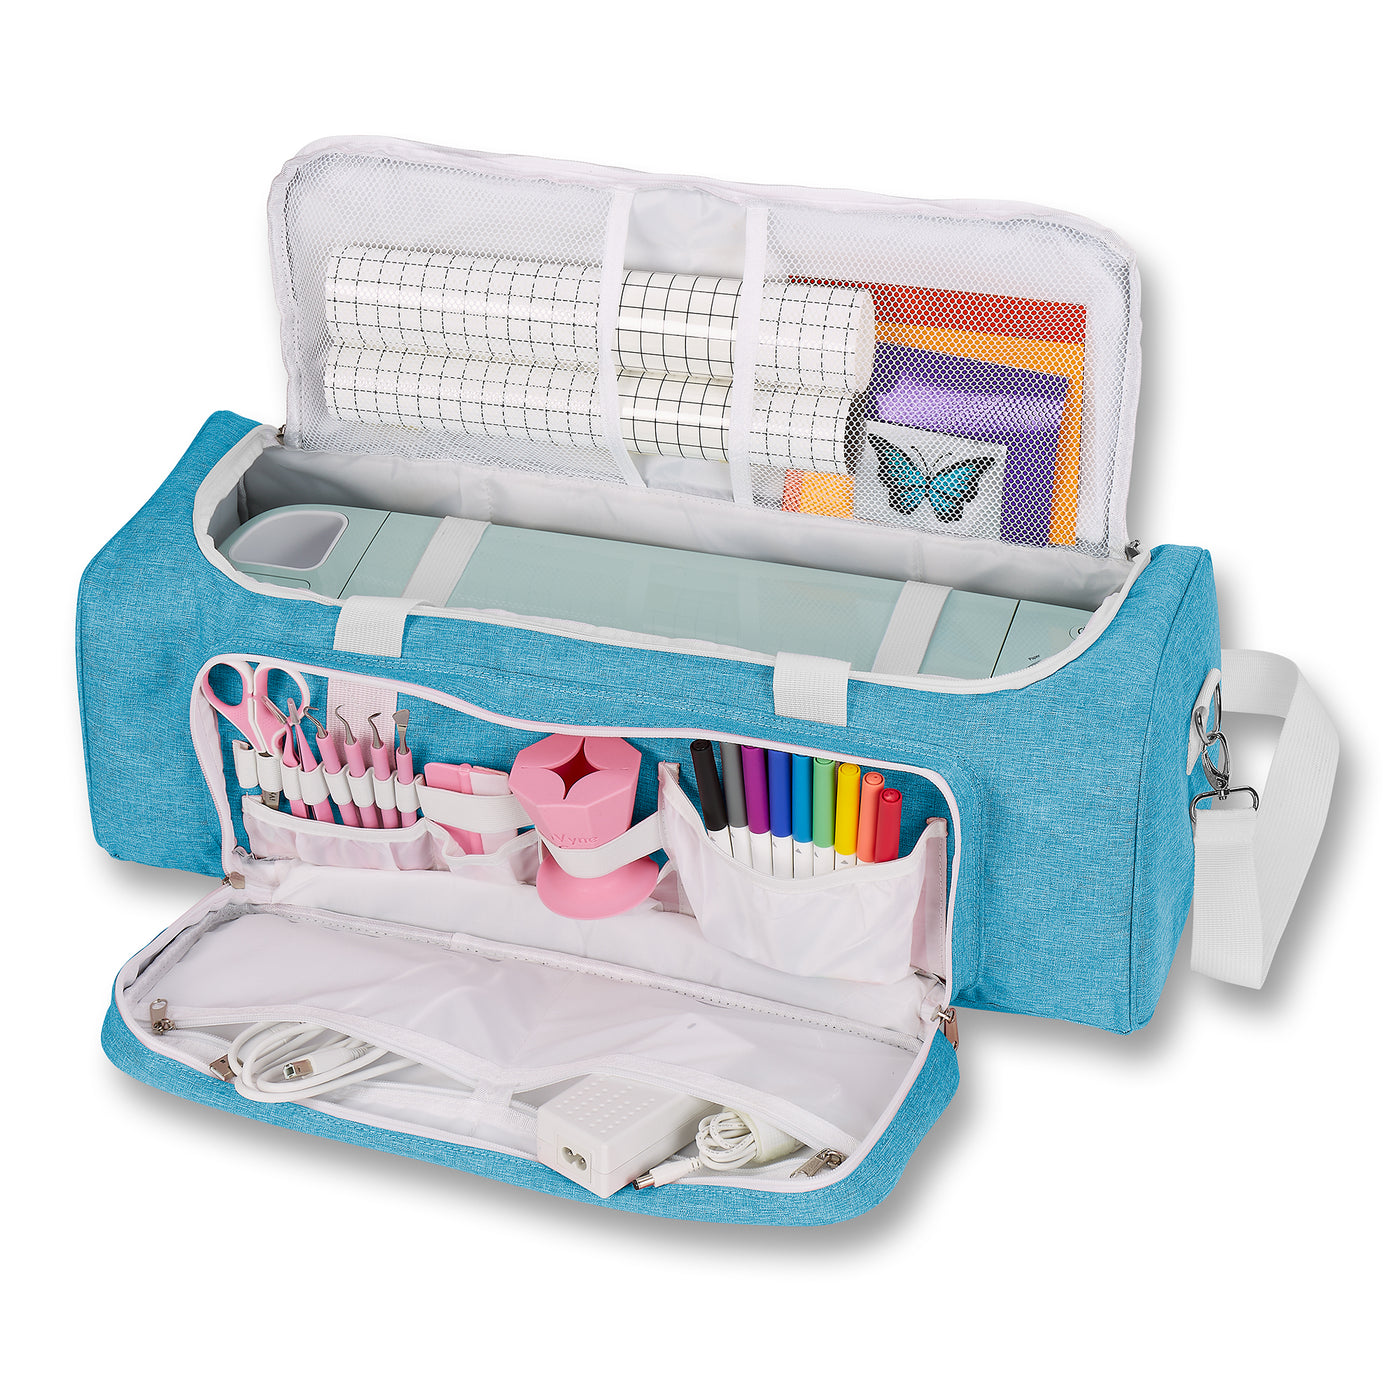 Carrying Case Compatible with Cricut Maker (Explore Air, Air 2), Storag..